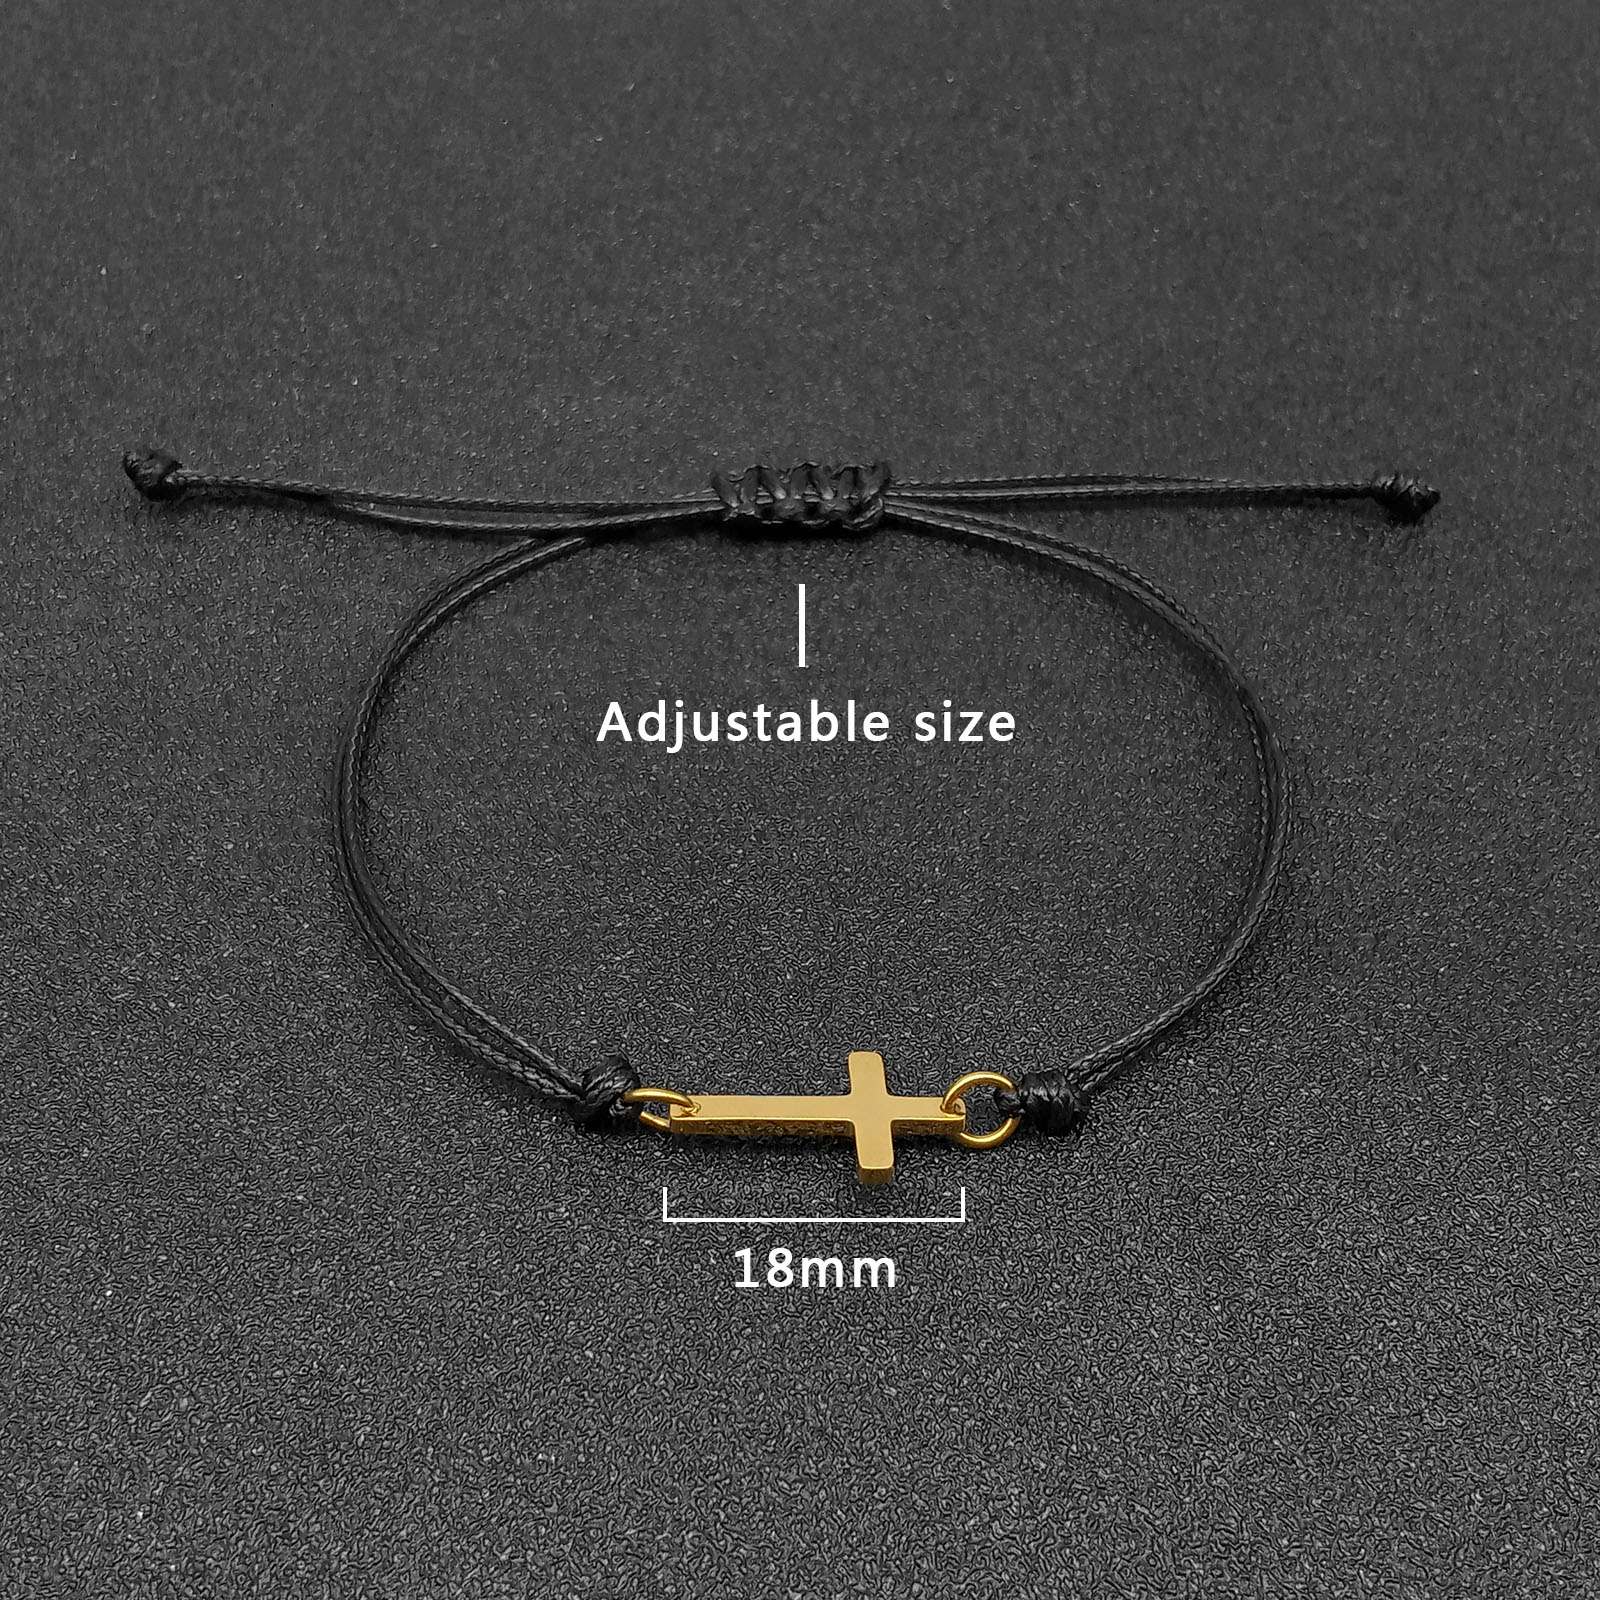 1:The cross is approximately 18mm long and the bracelet can be adjusted in size